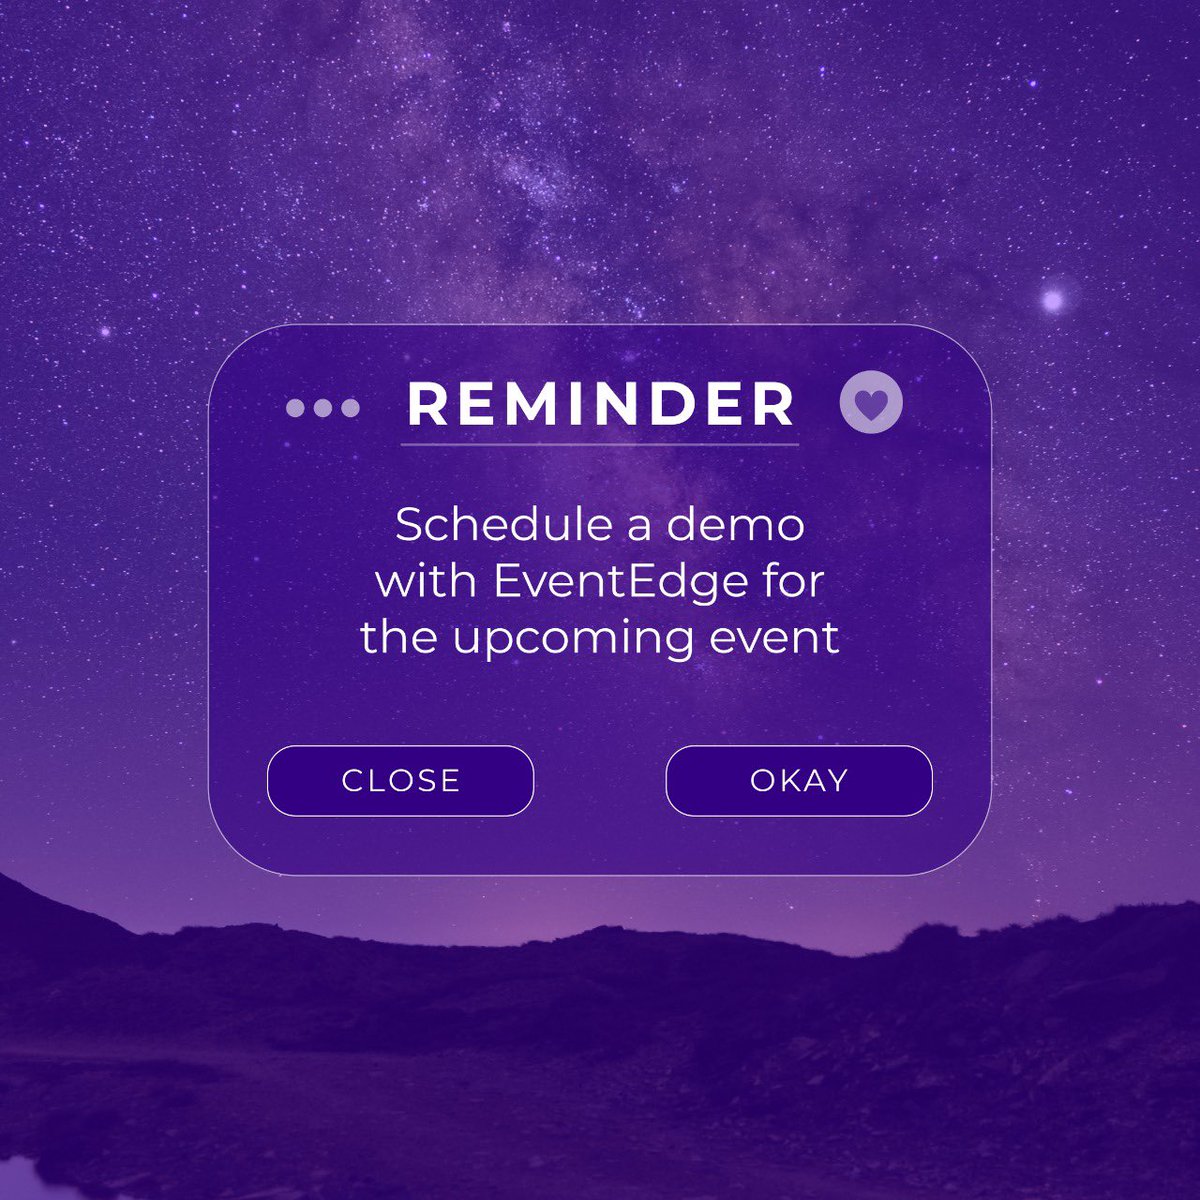 Just a Reminder!

#Eventedge #eventapp #eventapps #event #eventmanagement #conferenceapp #mobileeventapp #mobileppsdesign #iosappdeveloper #androidapplicaion #Reminderpost #Scheduleademo #Upcomingevent